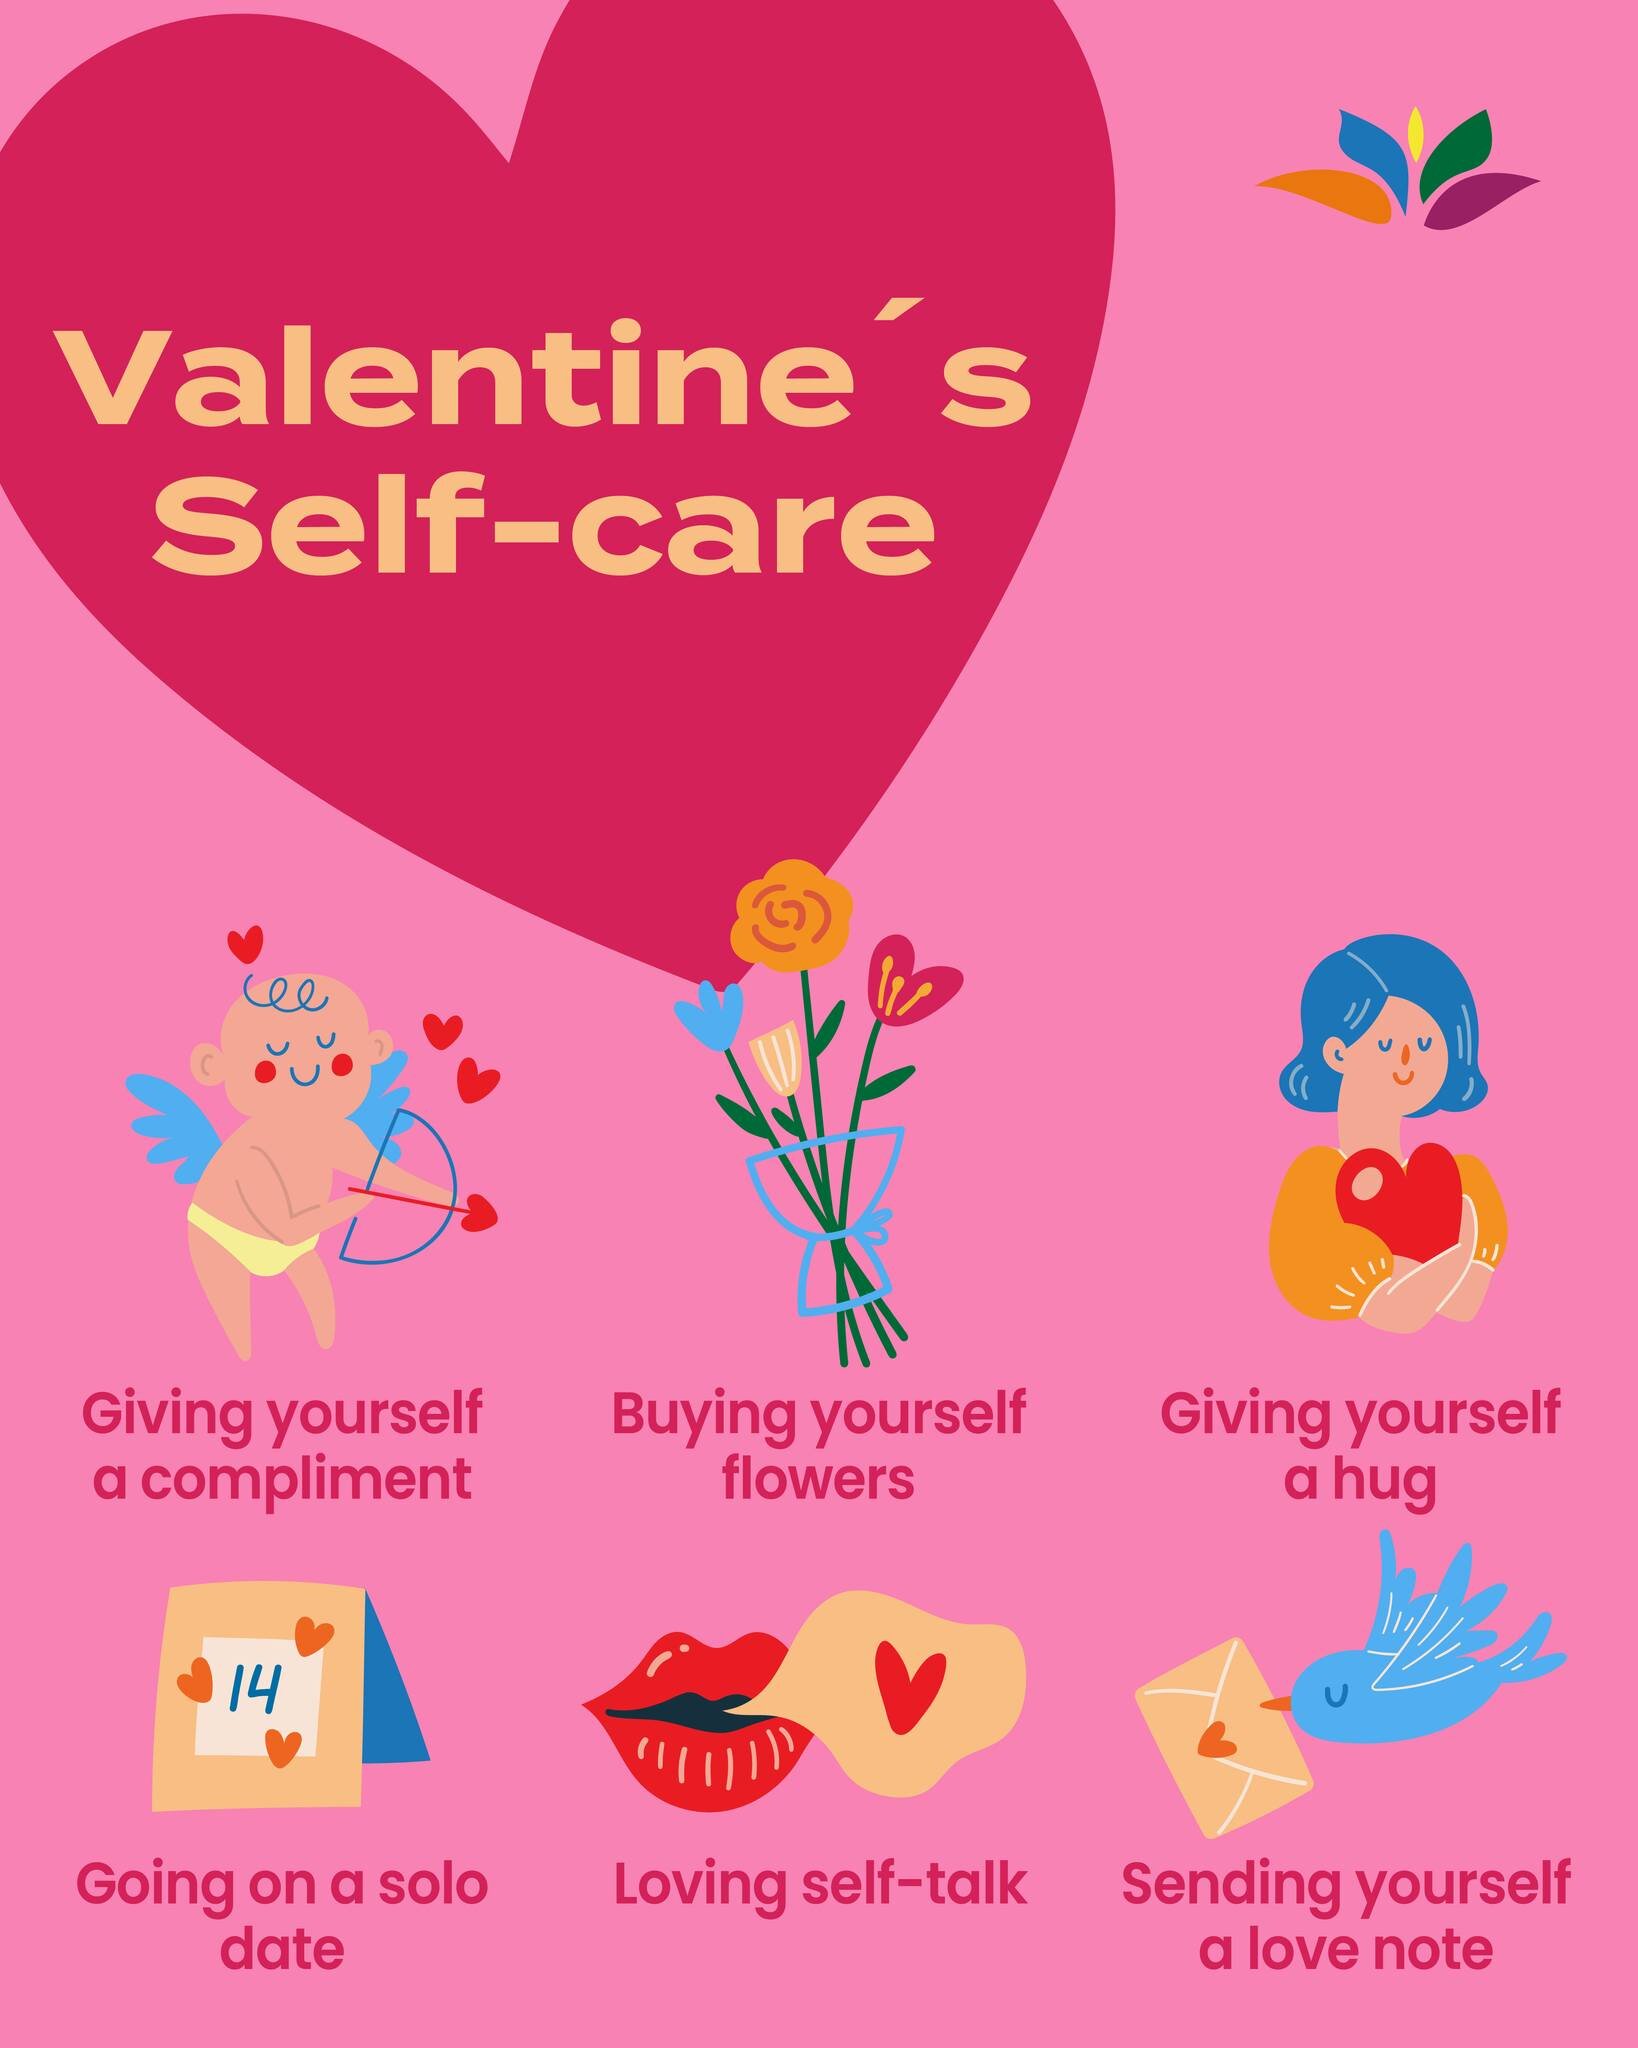 Happy Valentine's Day!🌹💕 Don't forget to give yourself some love too today and every day.❤️ #valentines2024 #selflove #selfcare #cannentacare #selfcareforchingonas